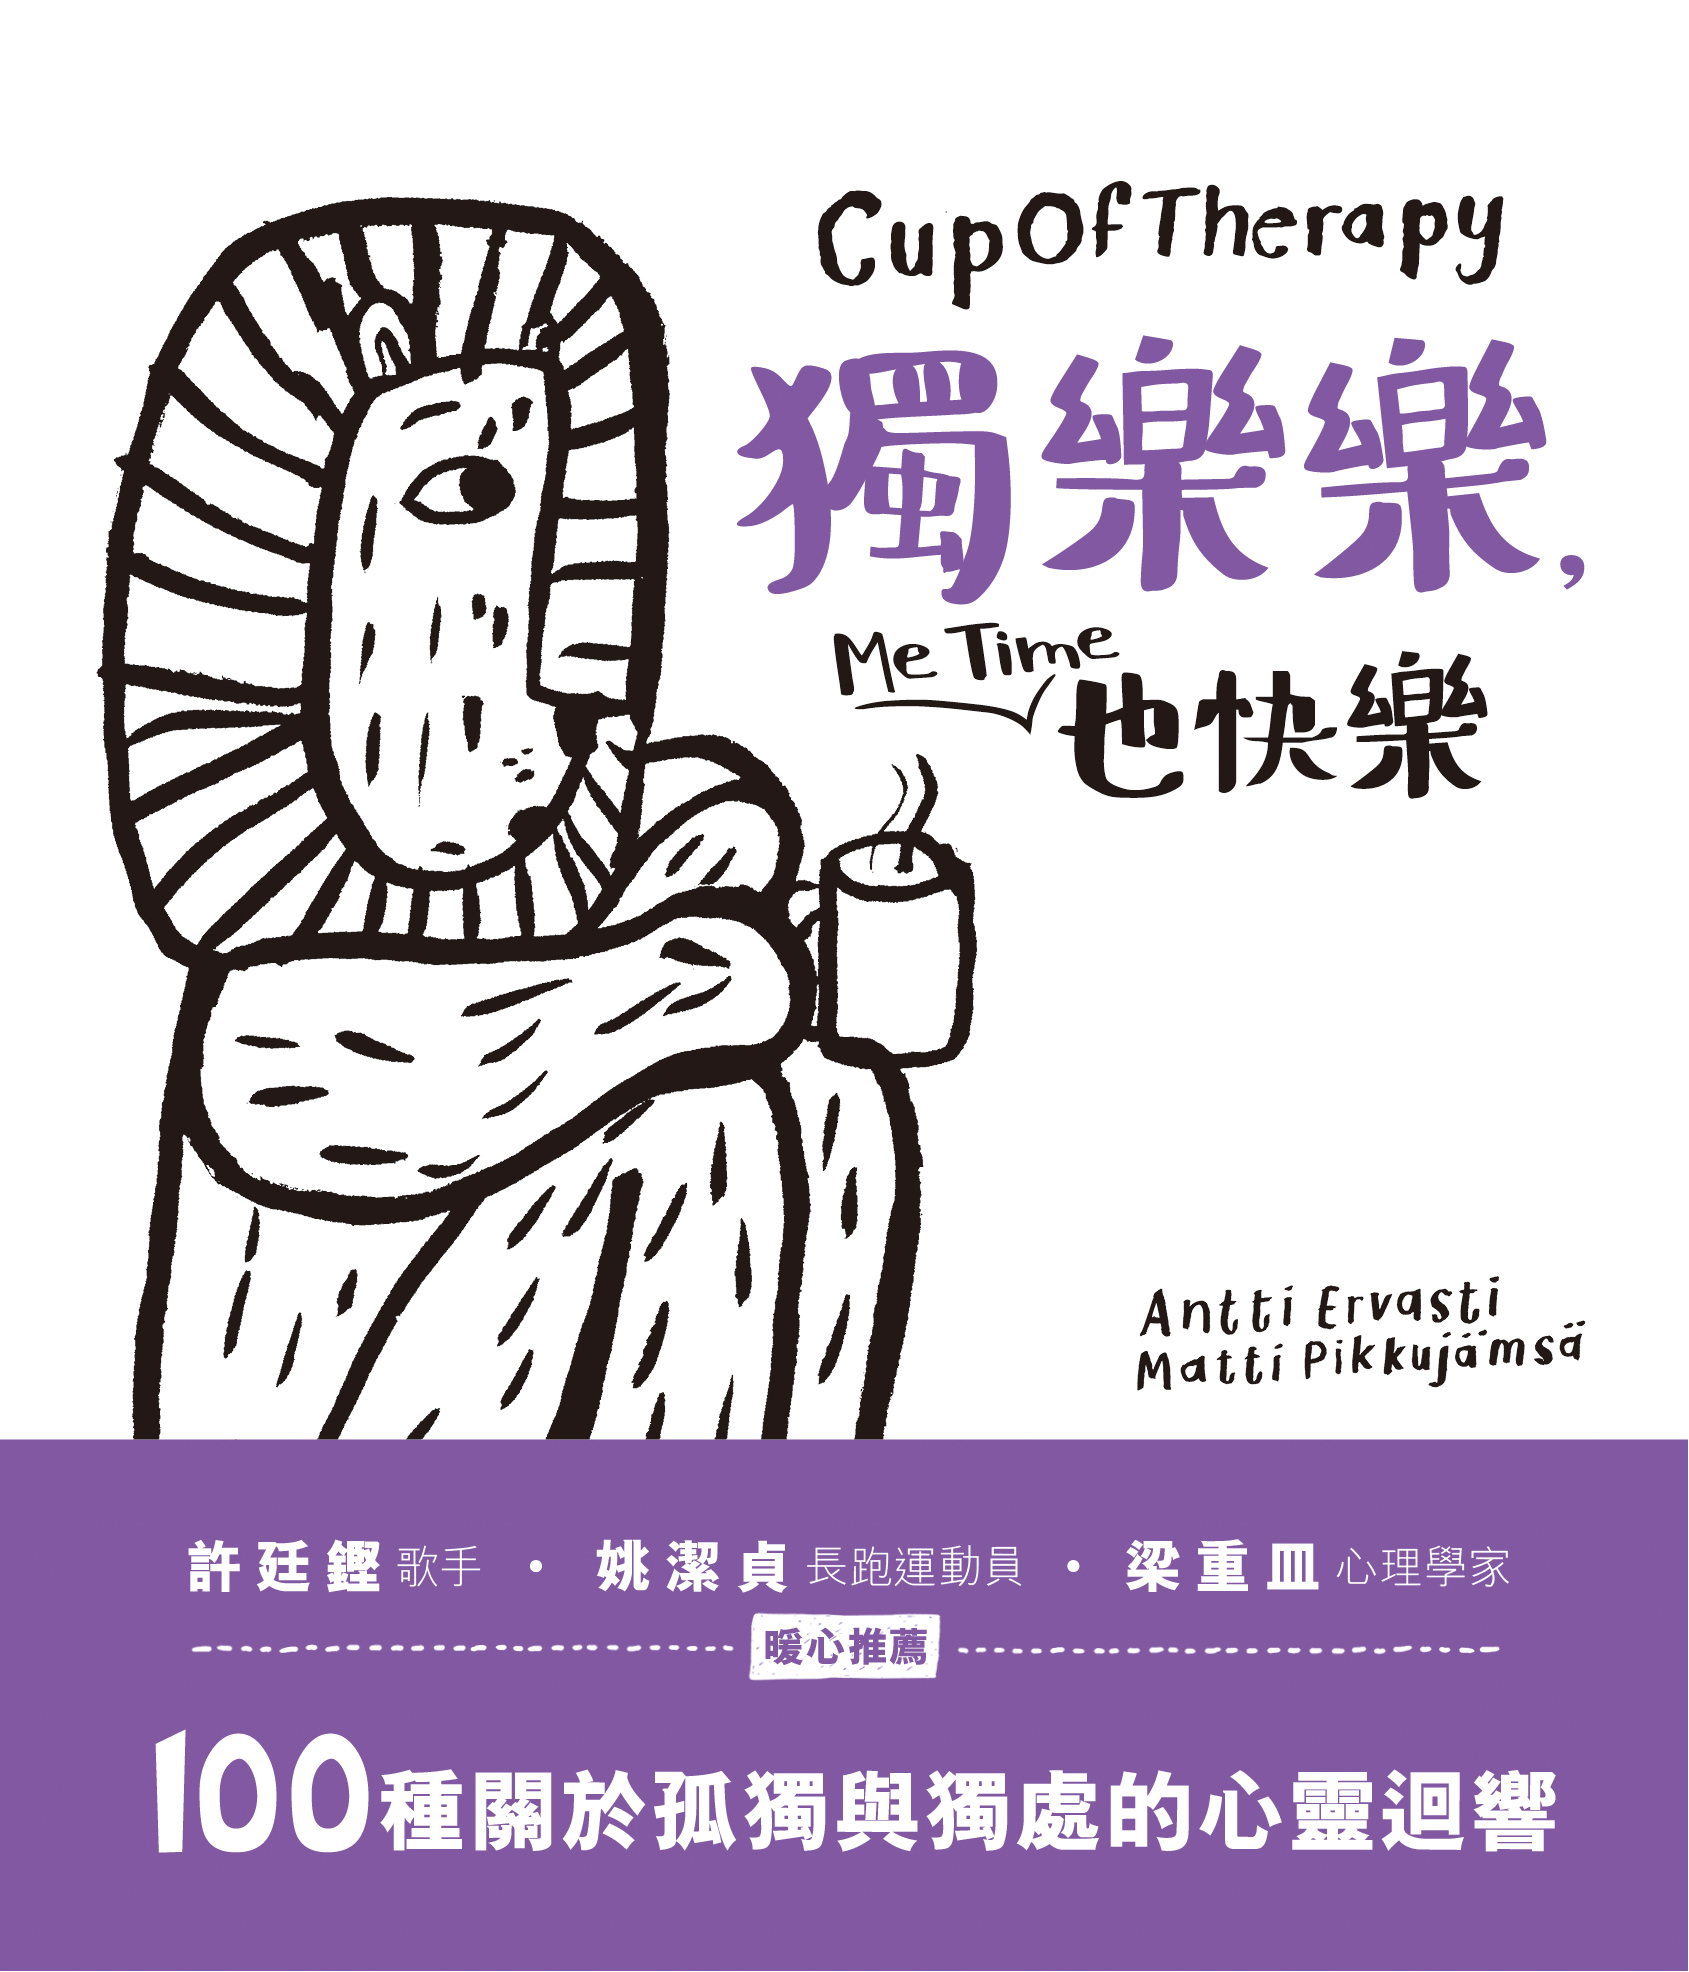 CupOfTherapy 獨樂樂，Me Time也快樂